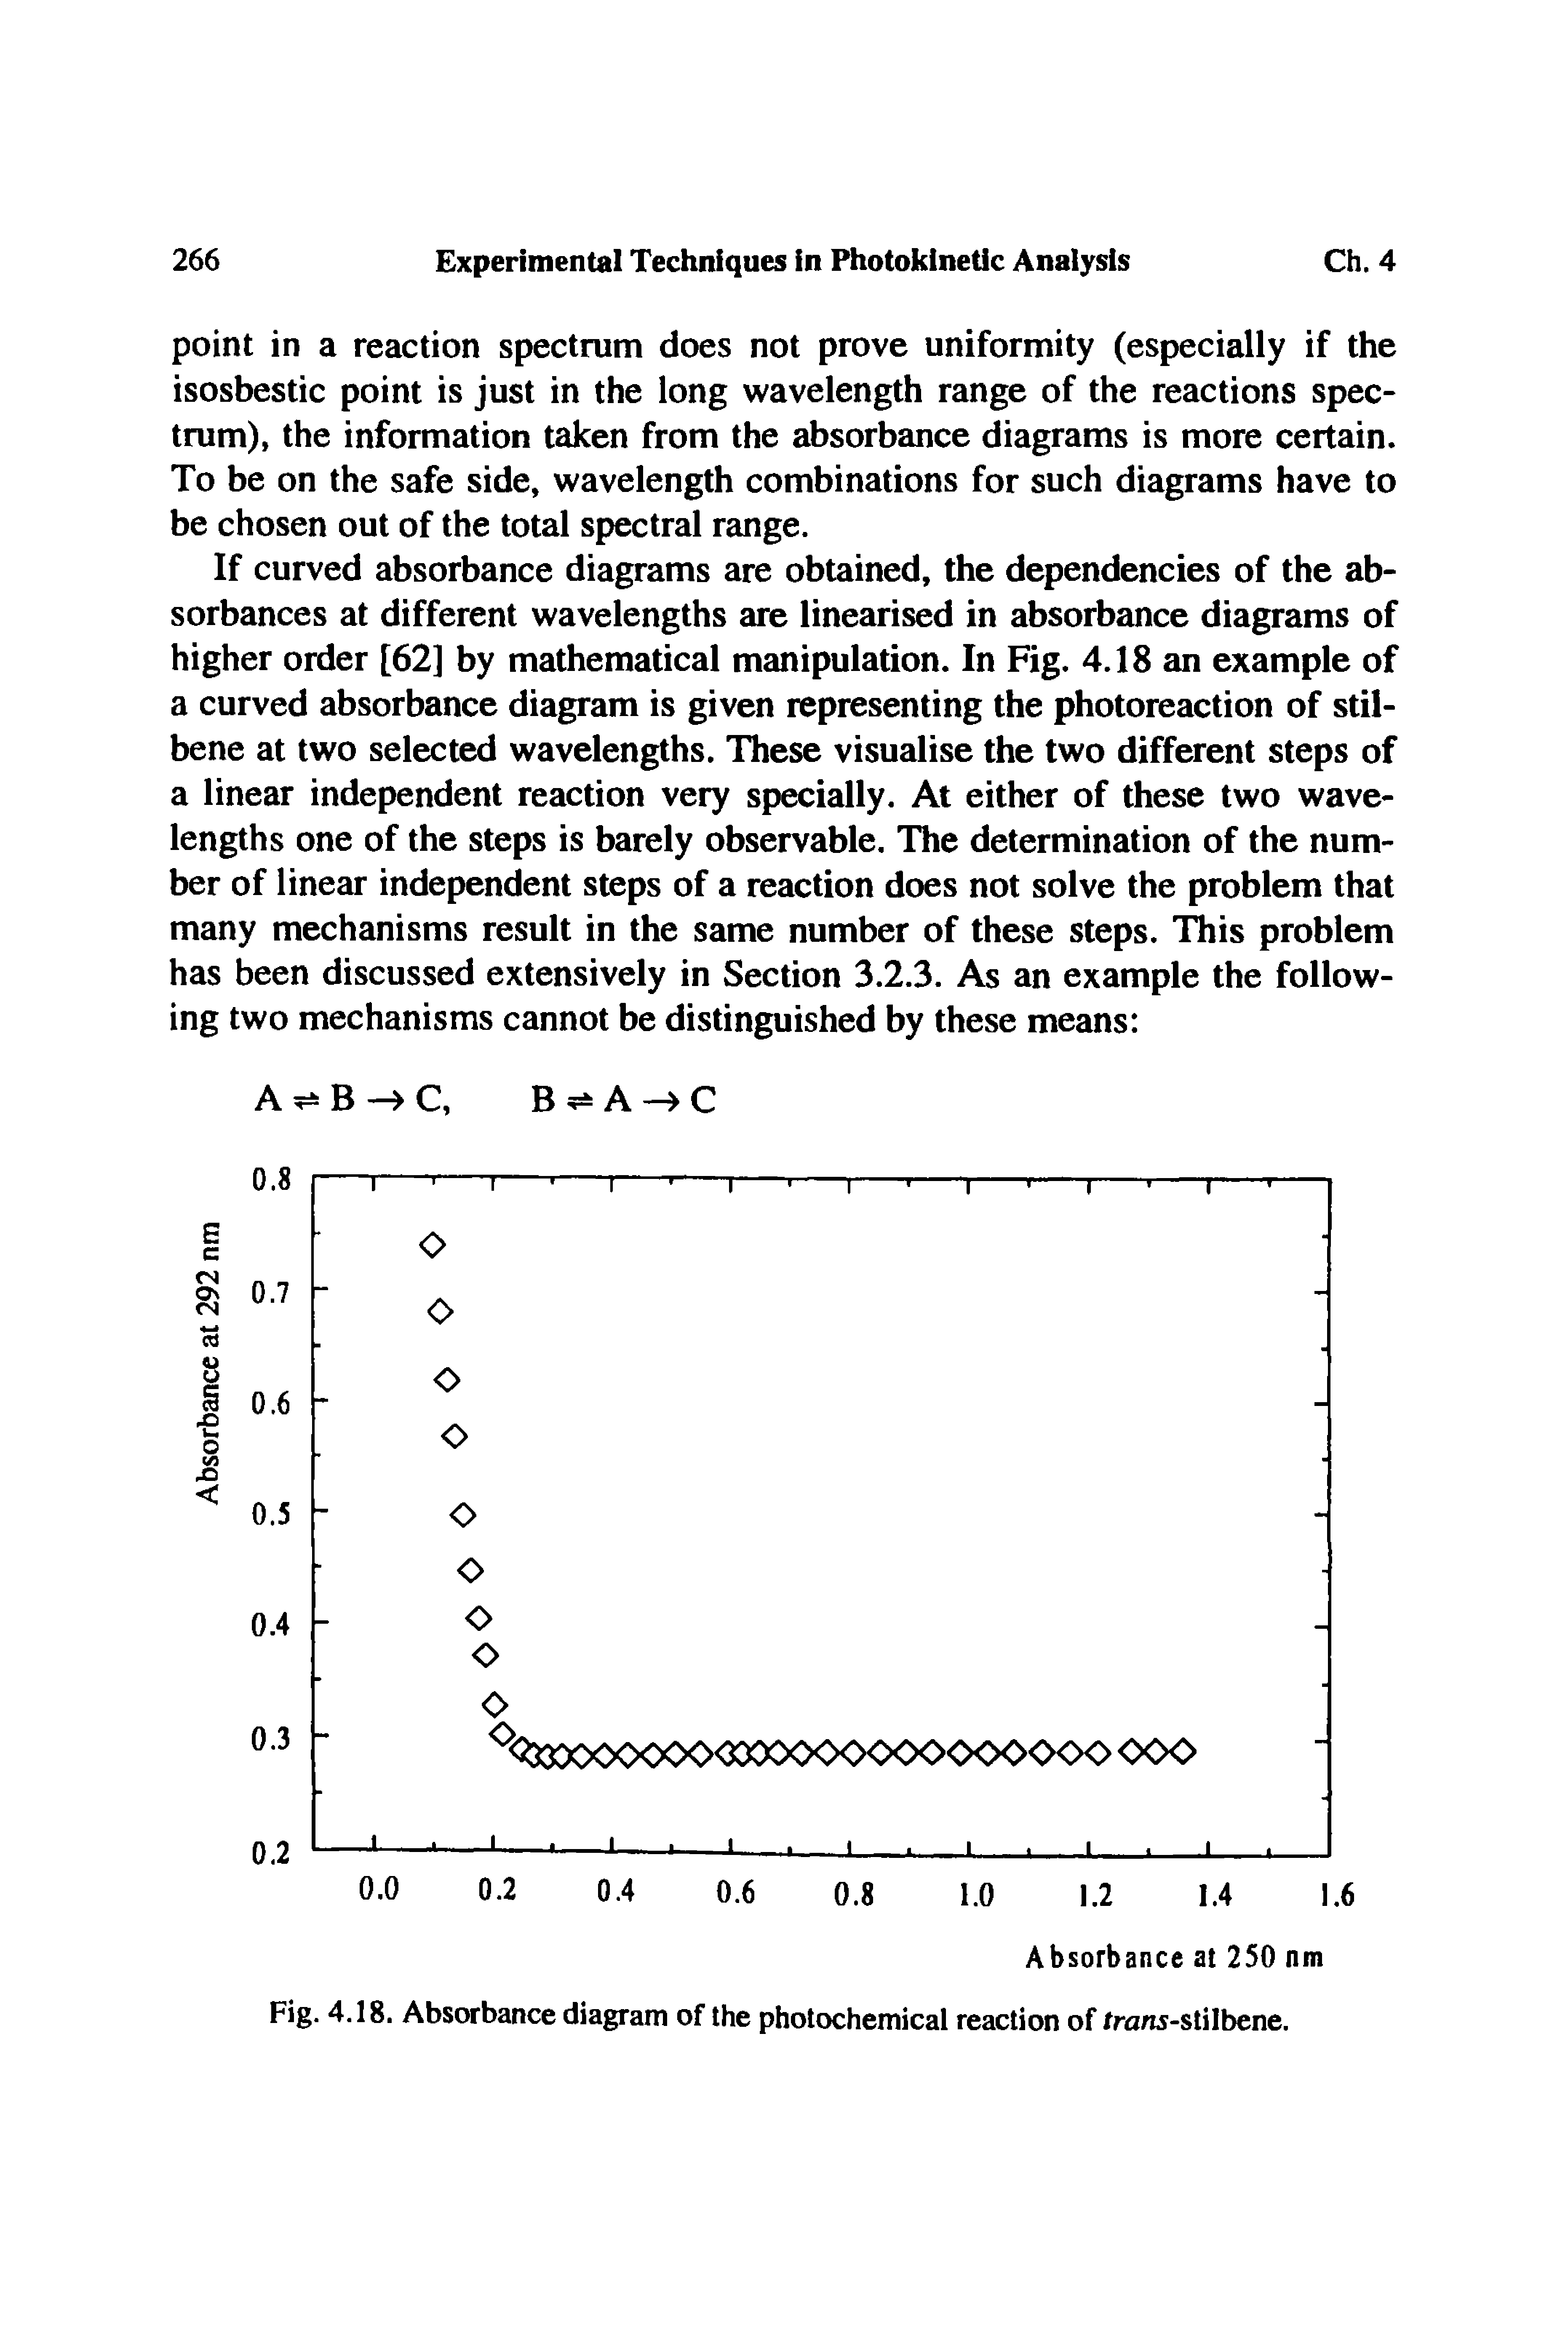 Fig. 4.18. Absorbance diagram of the photochemical reaction of frans-stilbene.